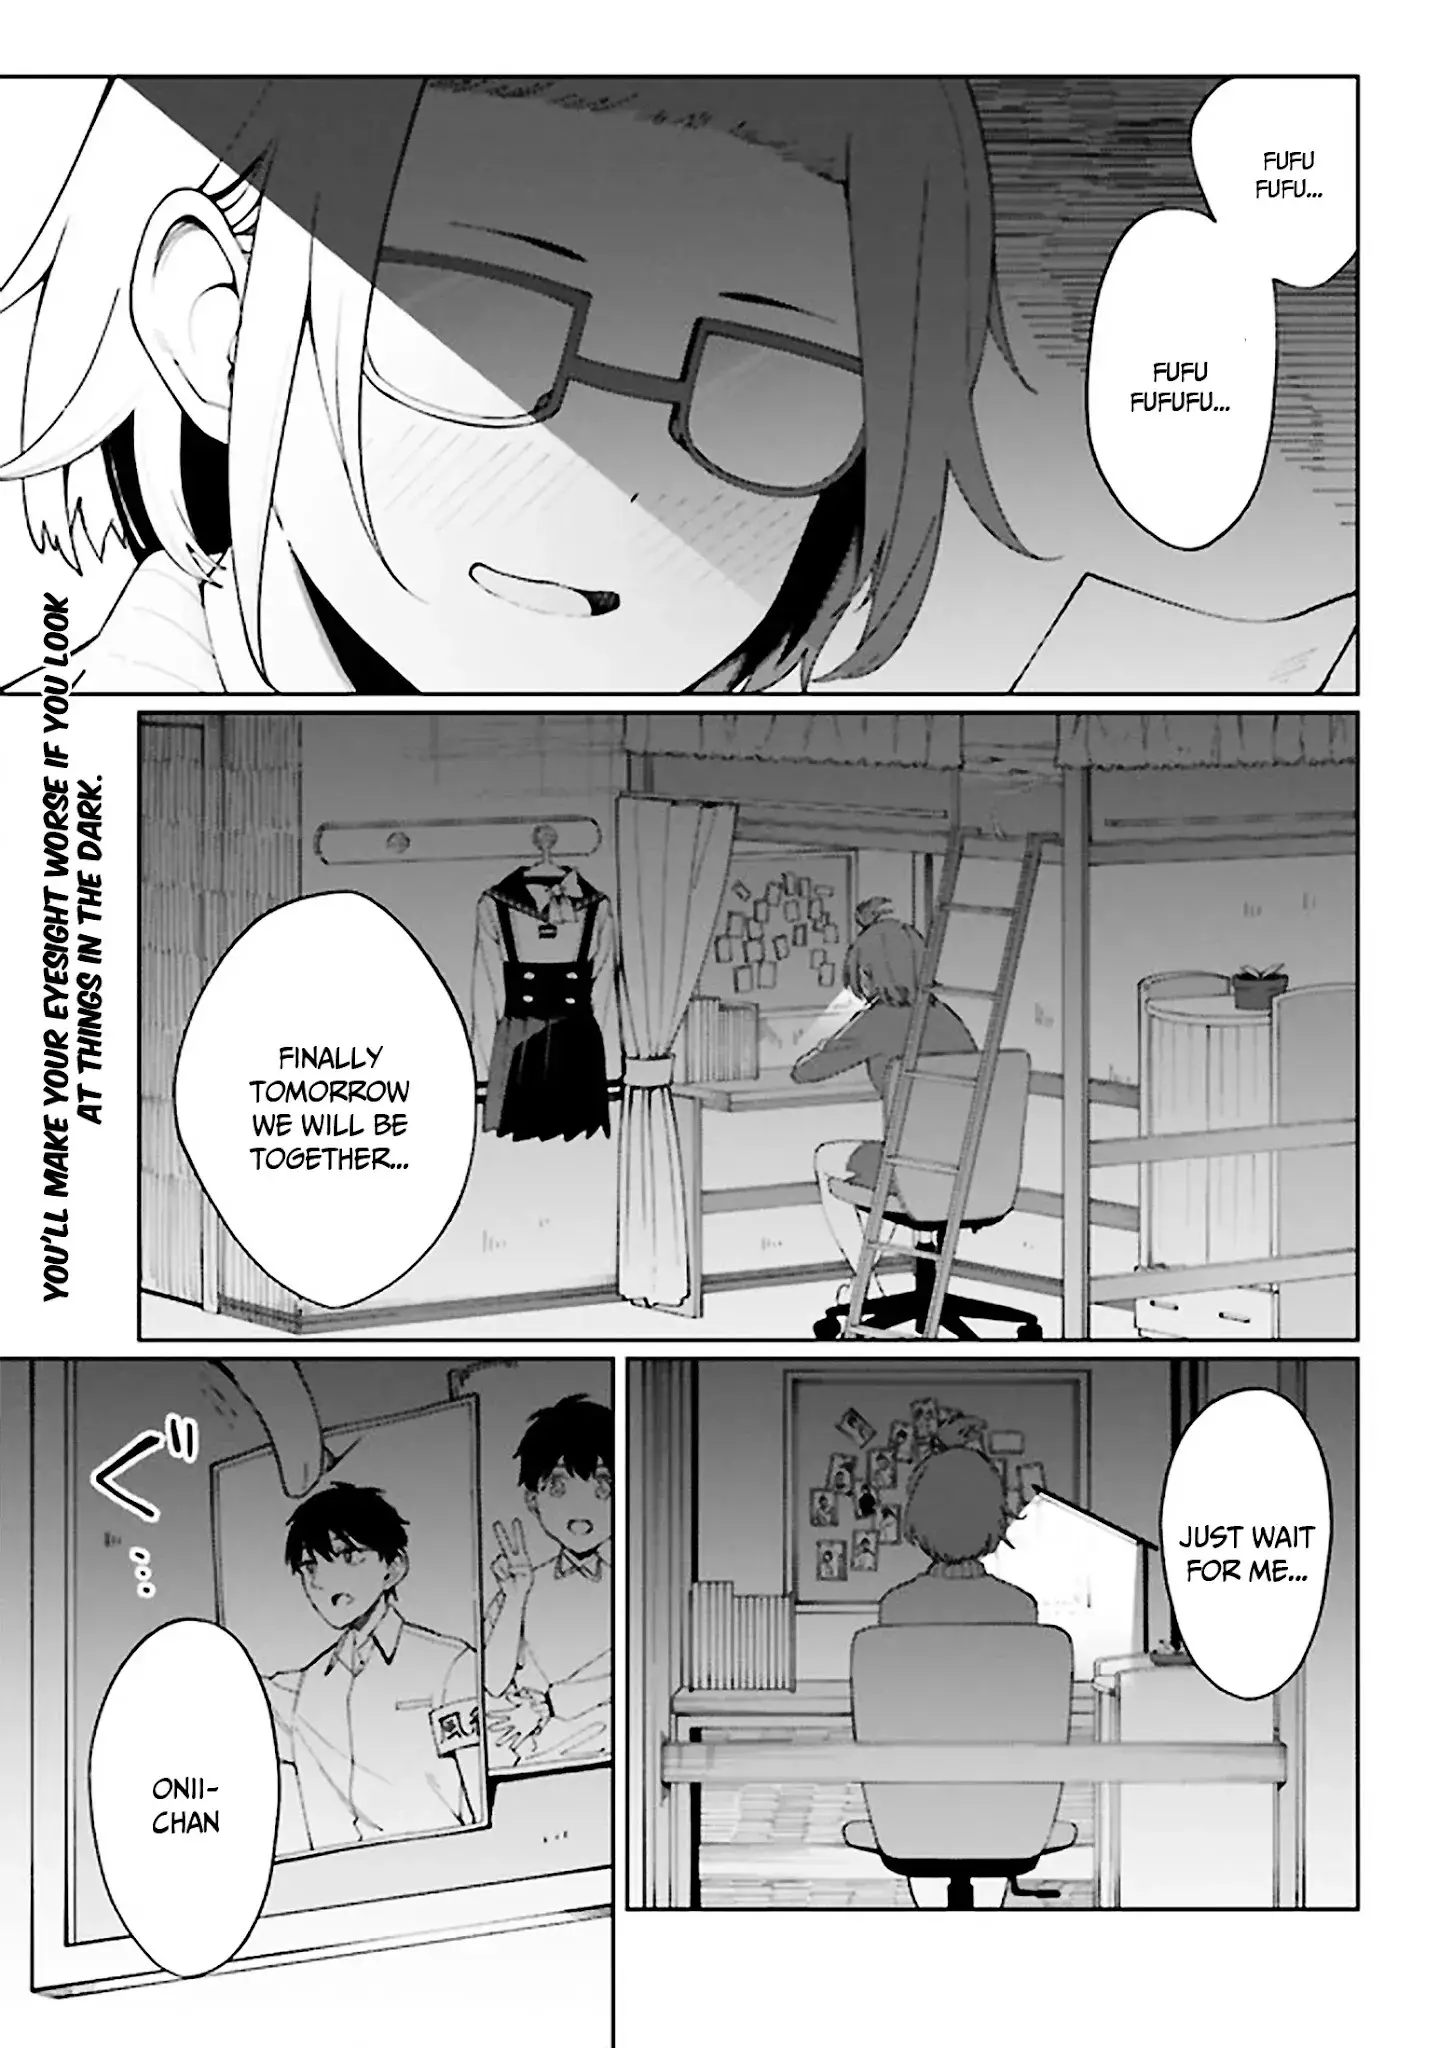 I Don't Understand Shirogane-San's Facial Expression At All - 6 page 2